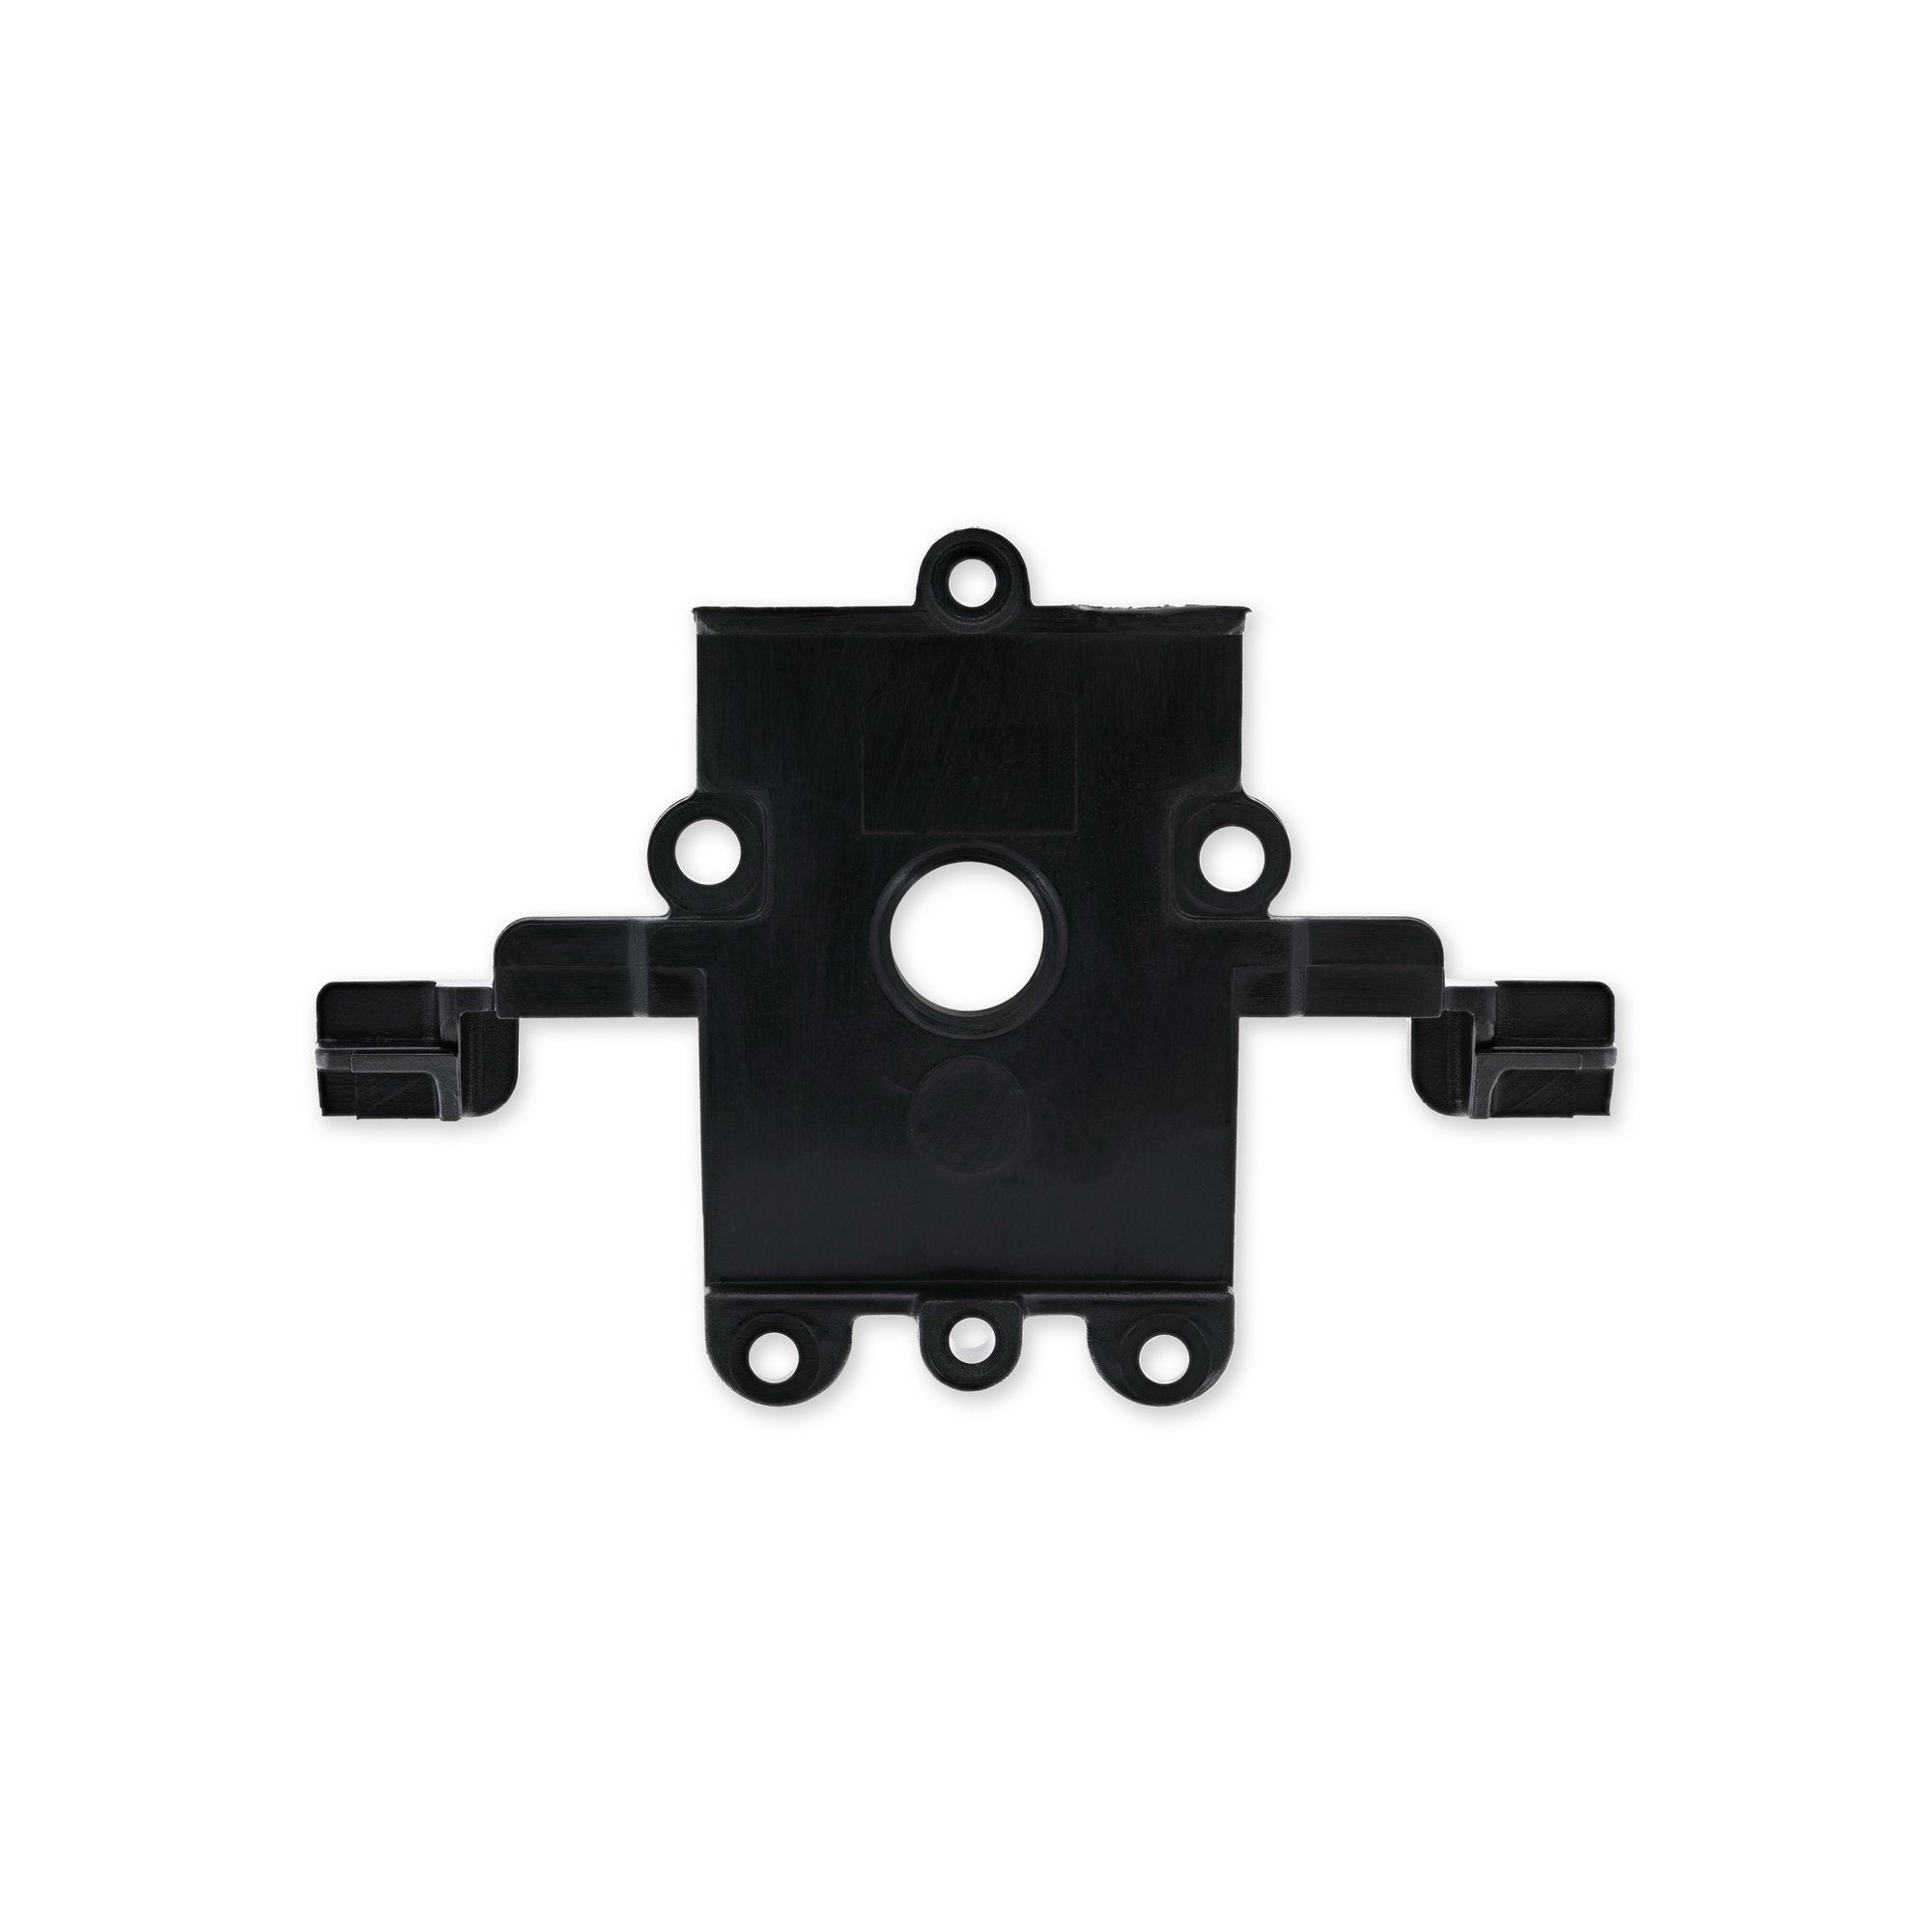 HTC Vive XR Elite Lens Assembly Inter-Pupillary Distance Gear Box Cover New